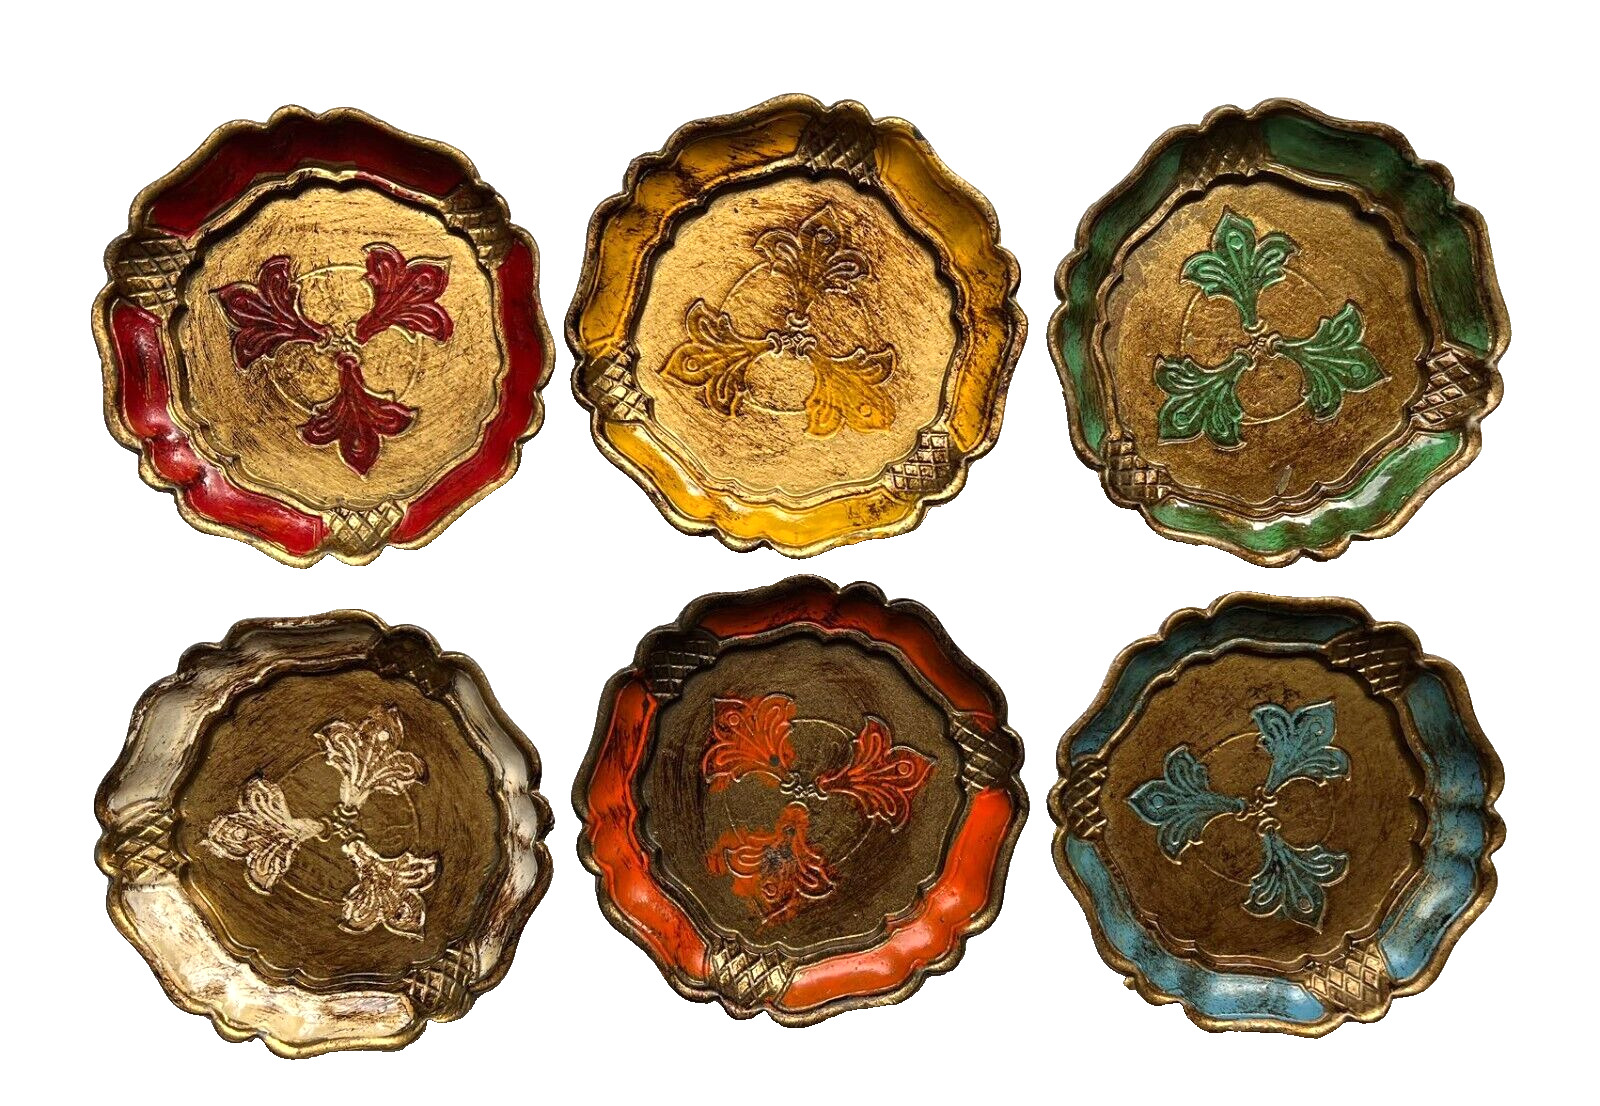 6 Vtg Italian Hand Painted Gilded Ornate Coasters/ Trinket Dishes, Retro Décor